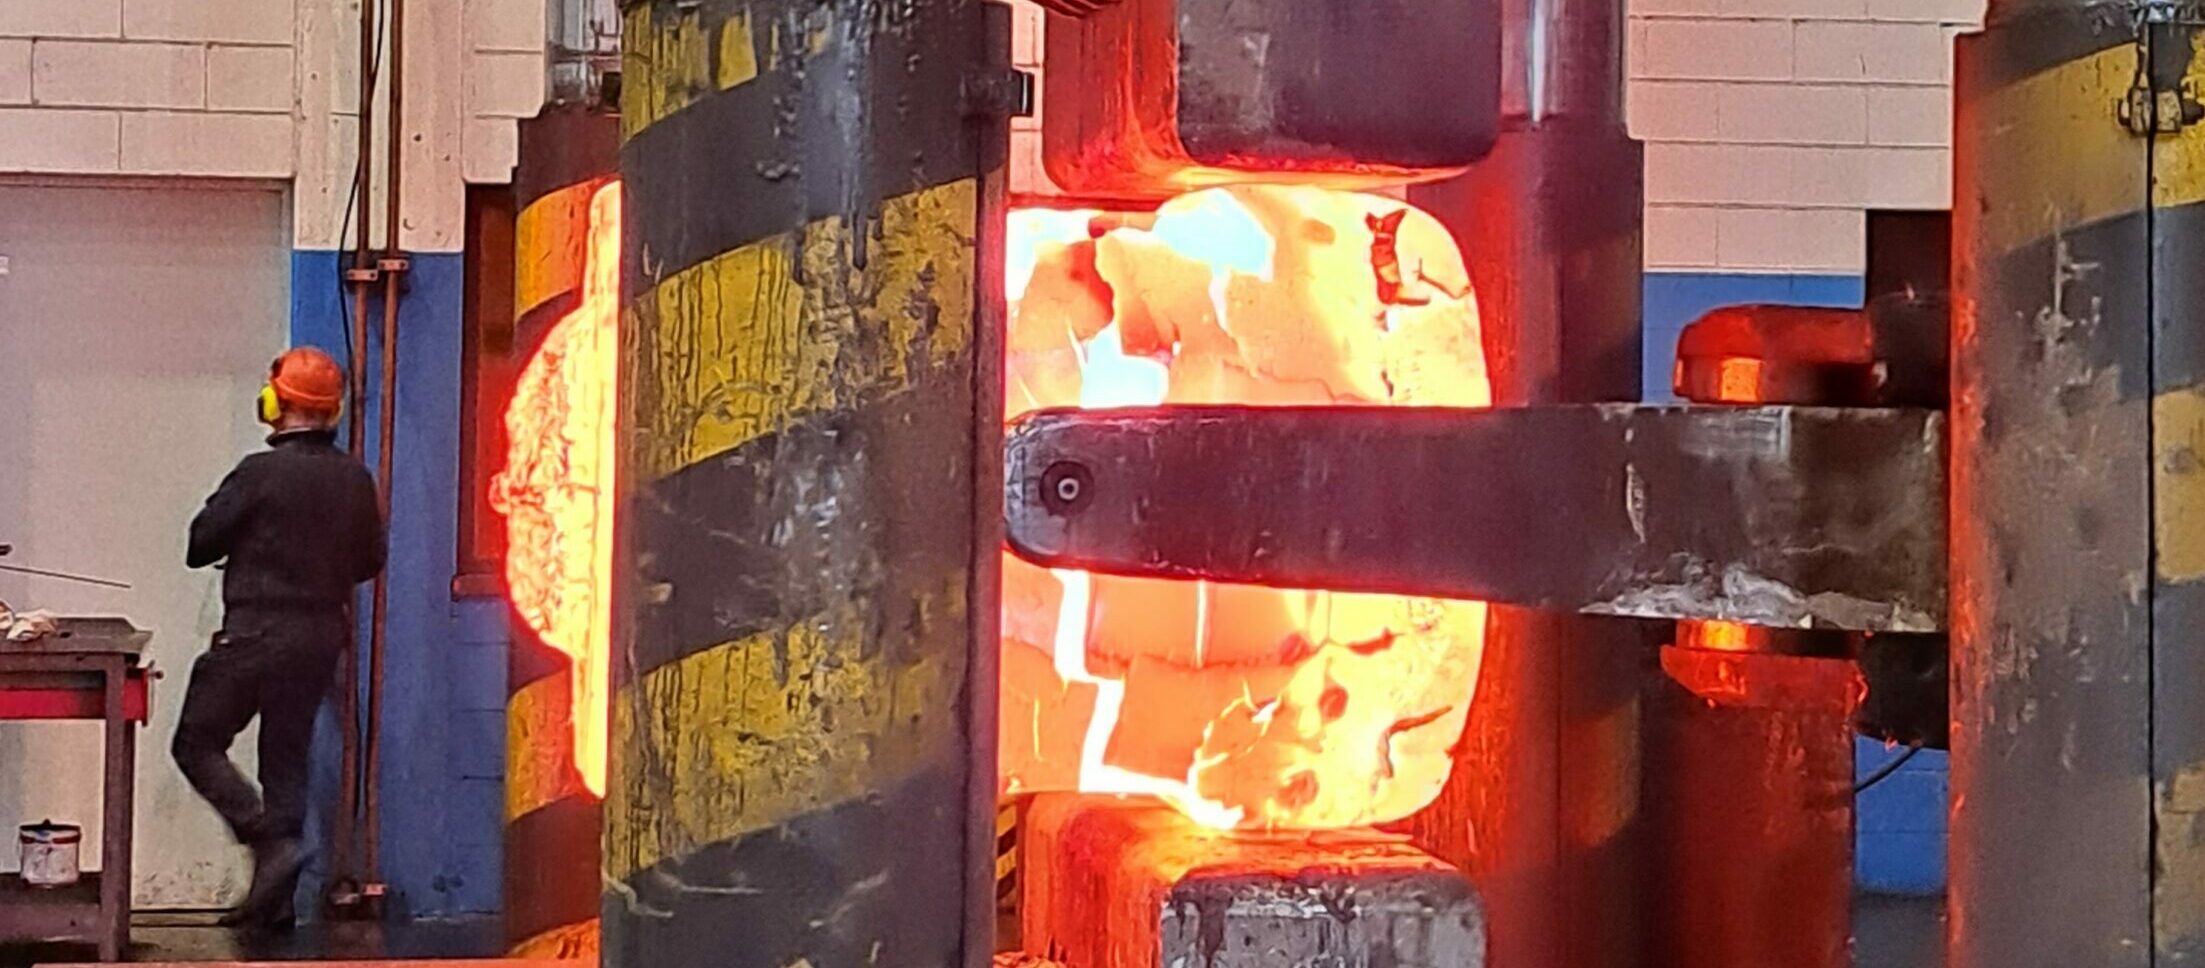 A glowing hot steel ingot being forged under the press